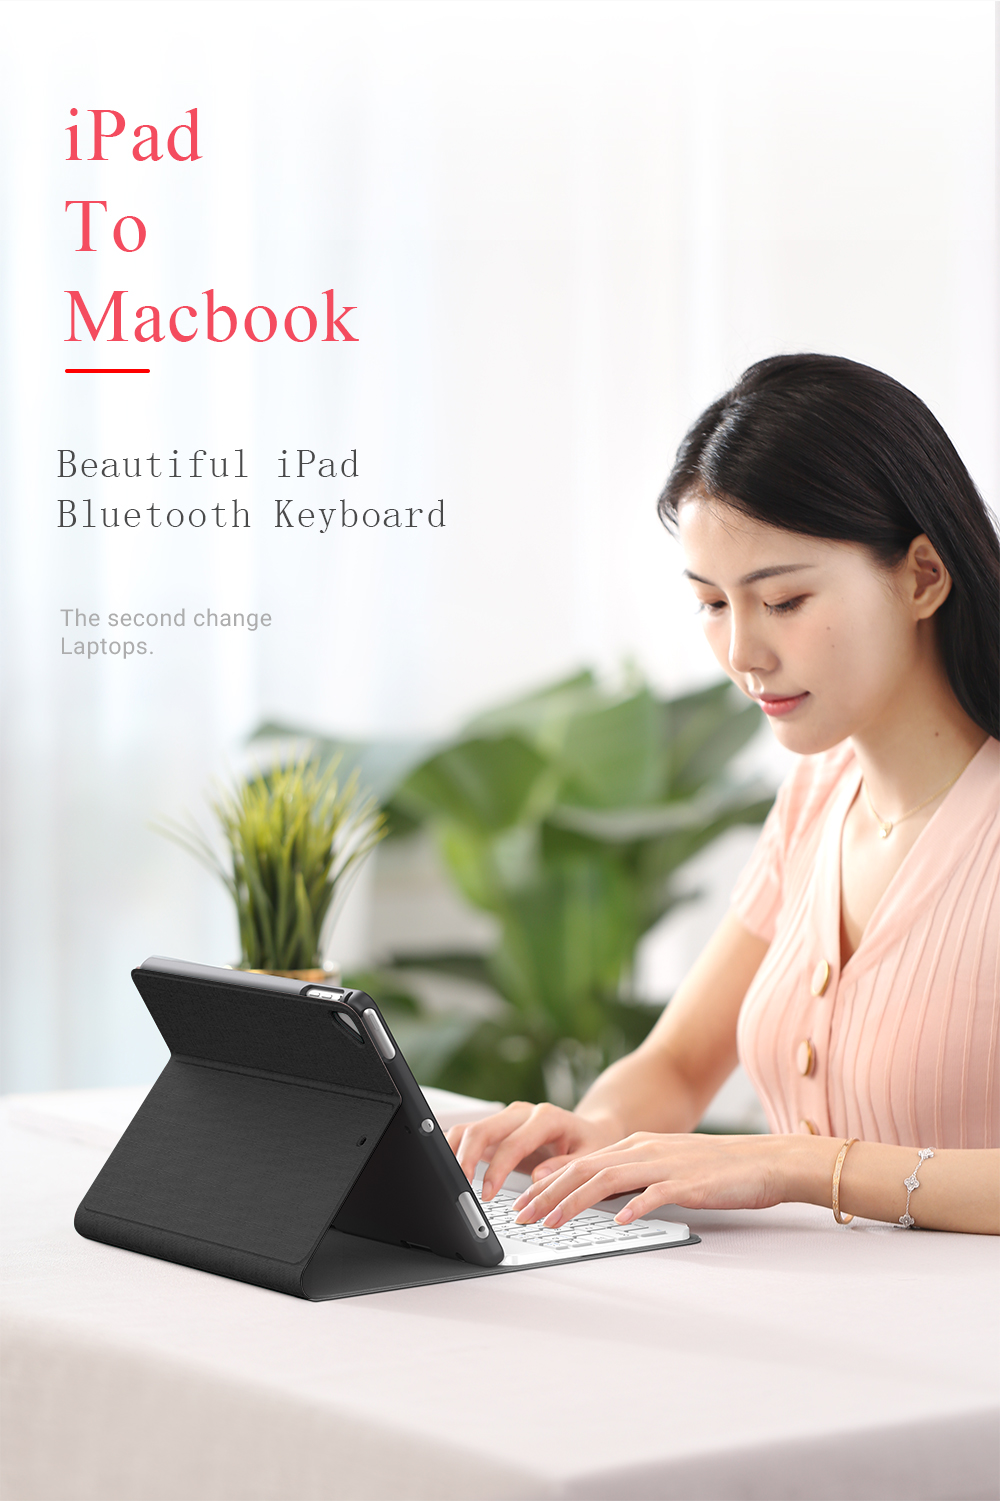 Auto Sleep Detachable bluetooth Wireless Keyboard Kickstand Tablet Case With Pencil Holder For iPad Pro 10.5 Inch 2017/iPad Air 10.5 Inch 2019 9